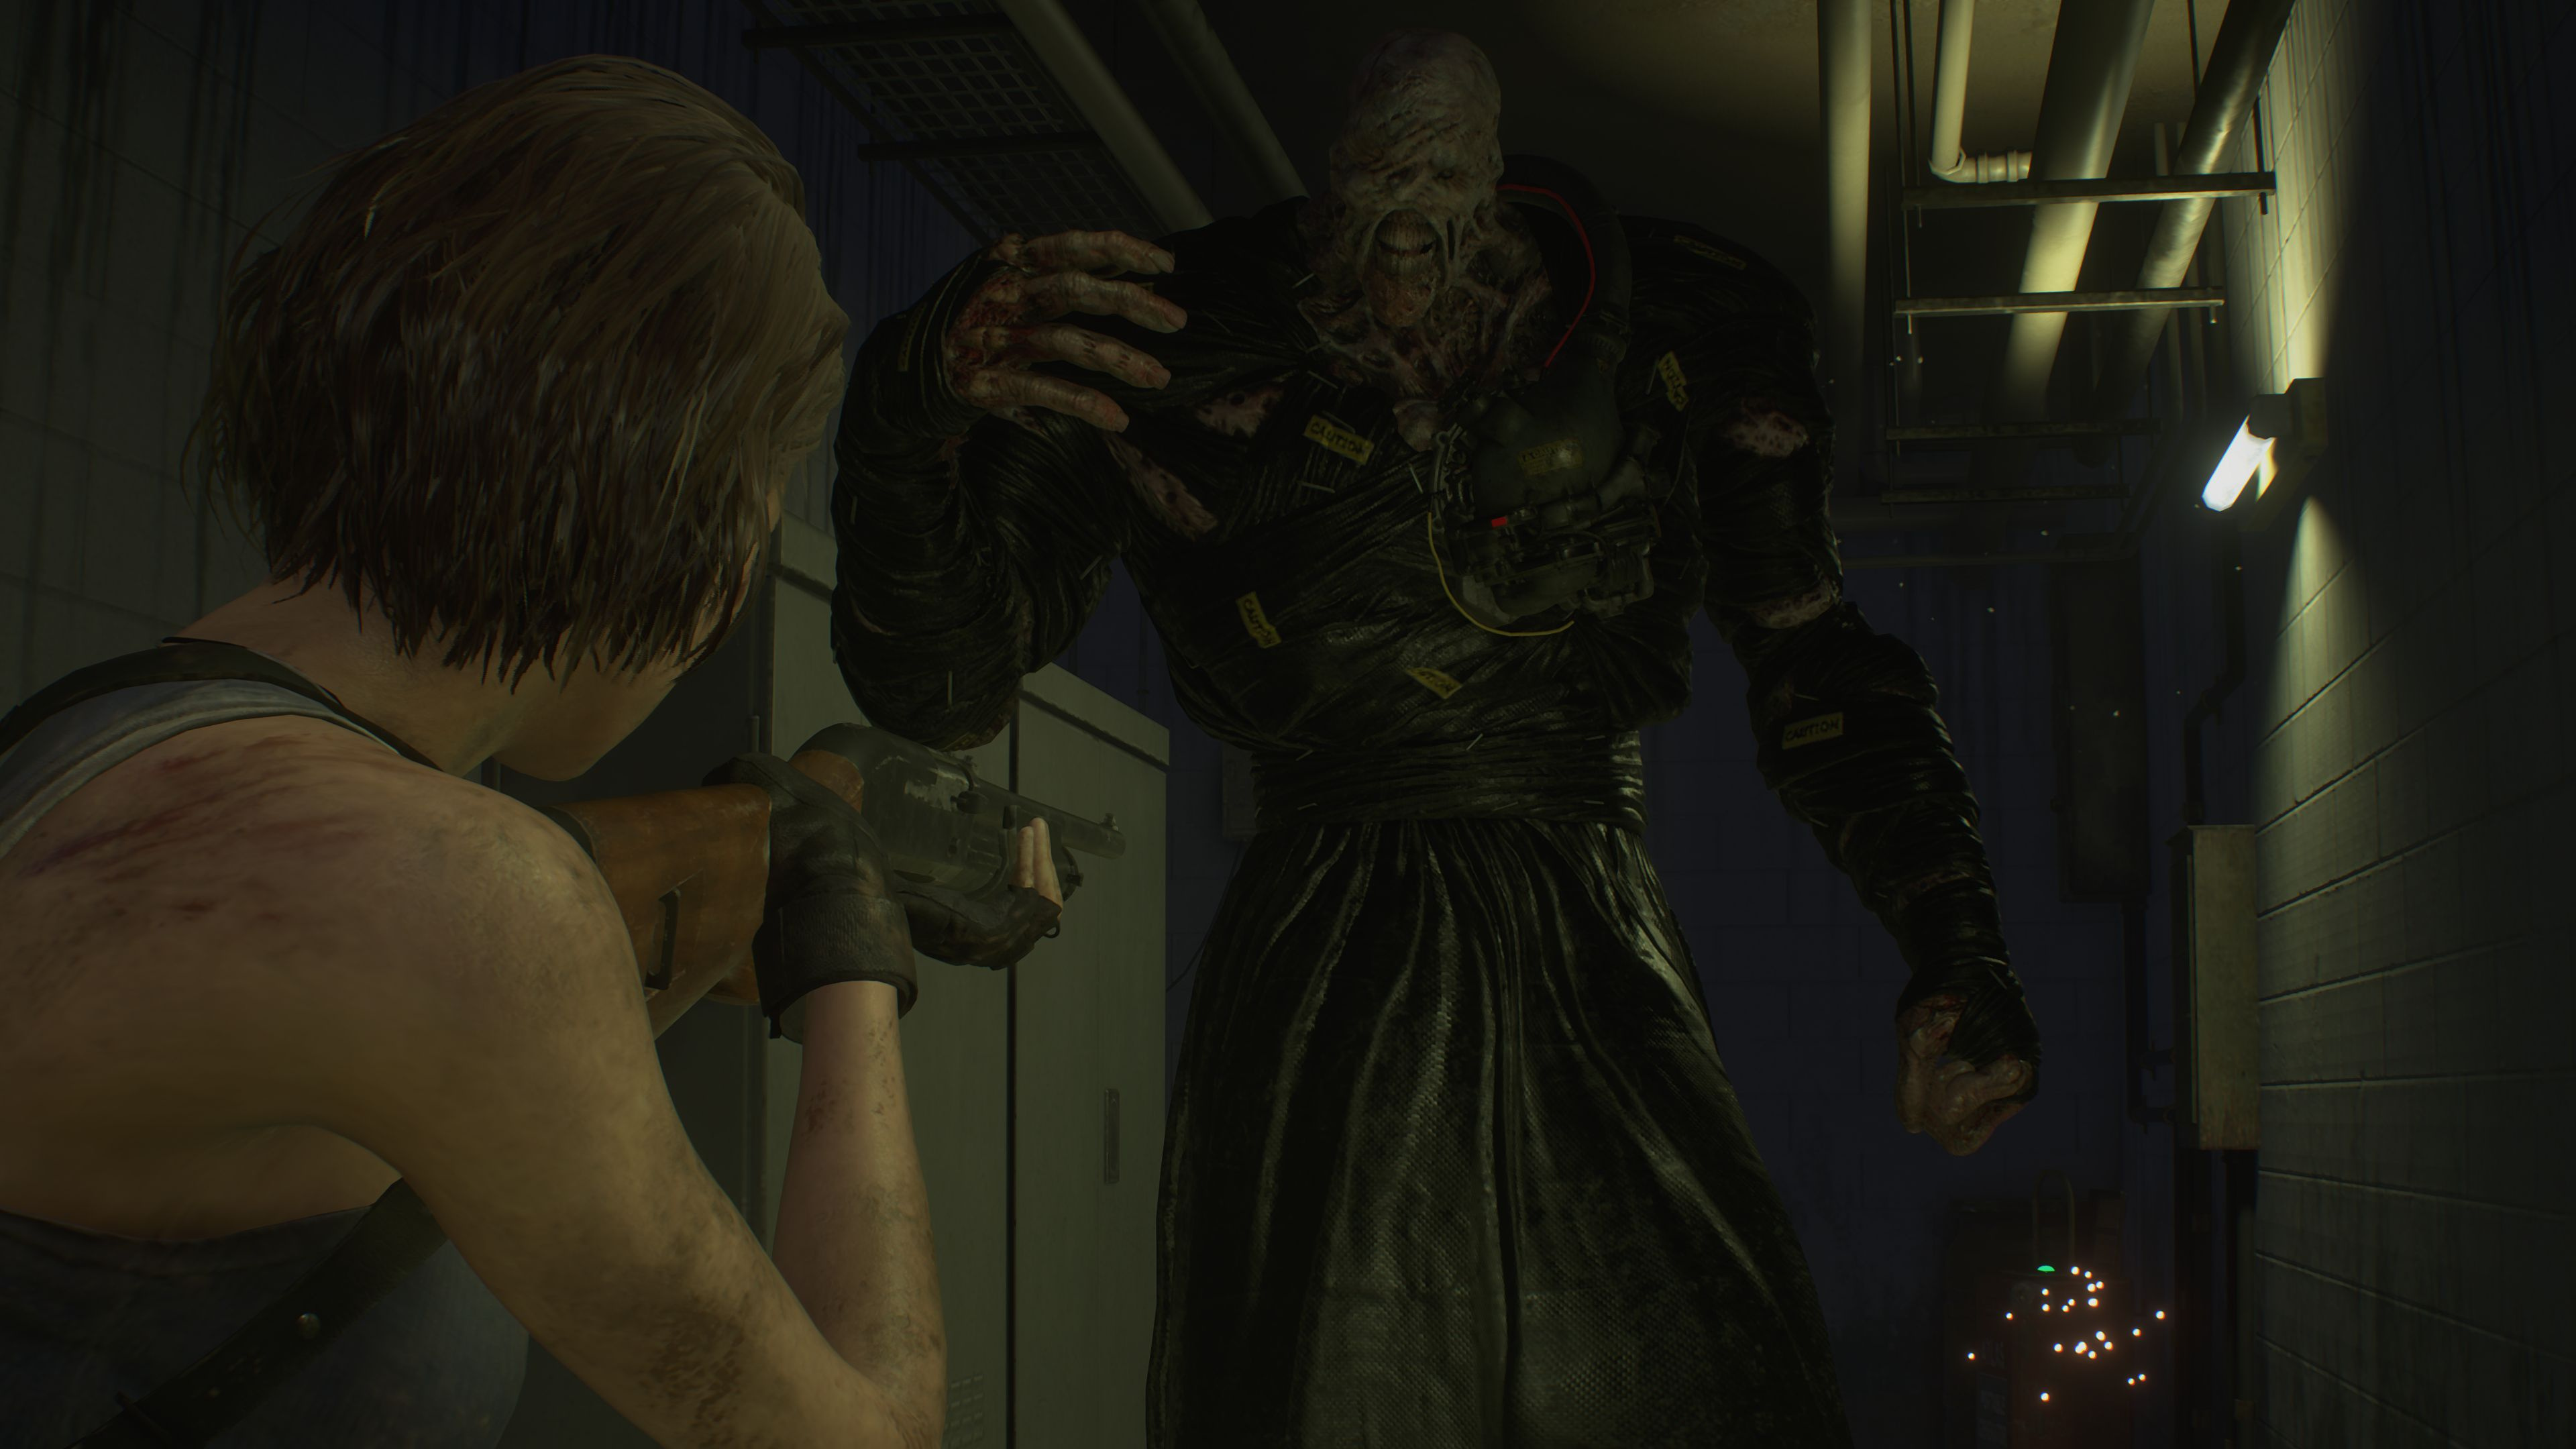 Gallery: All New Resident Evil 3 Screenshots - Nemesis, Enemies, and